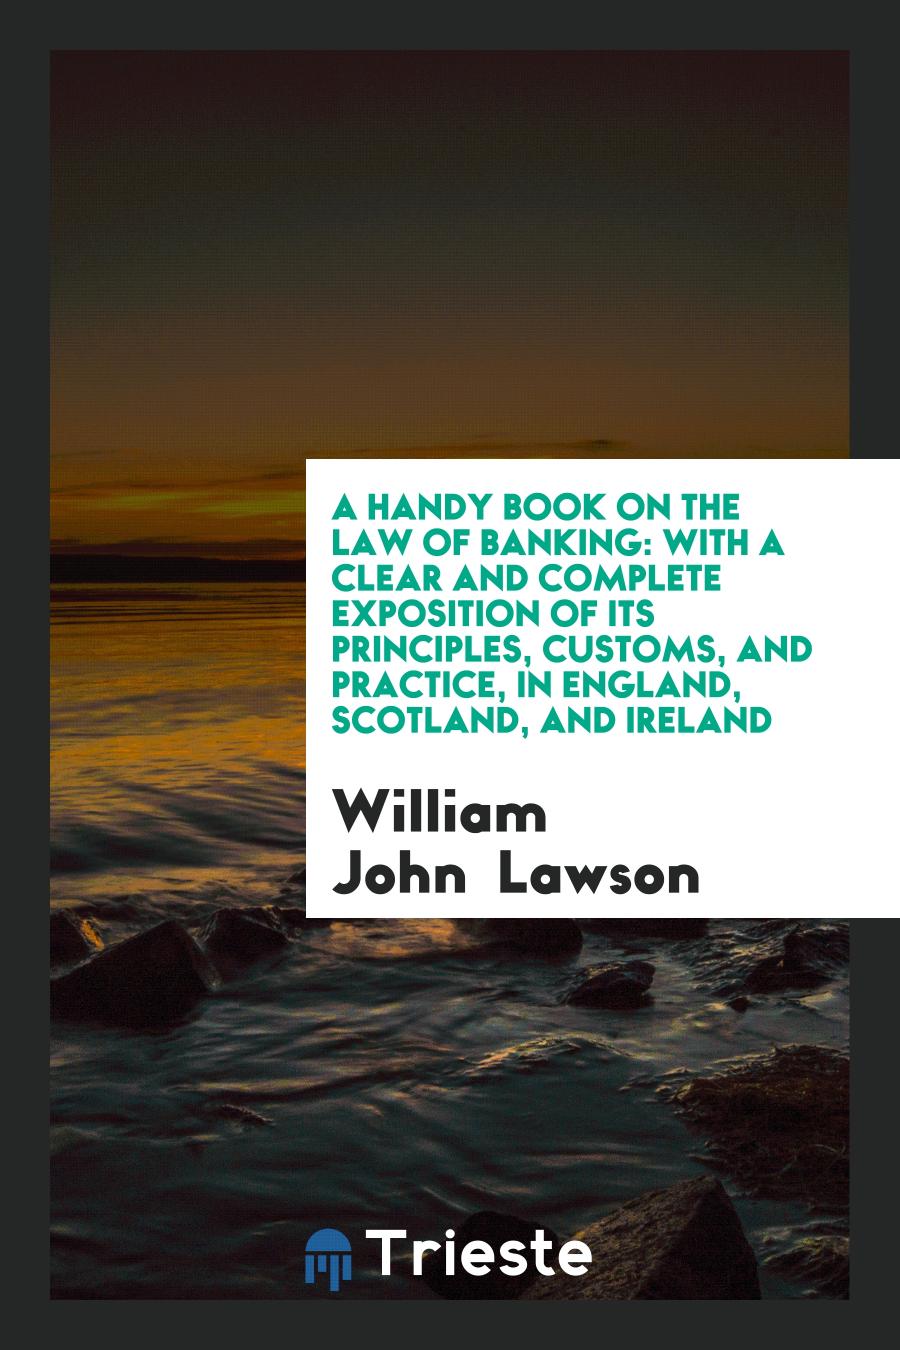 A Handy Book on the Law of Banking: With a Clear and Complete Exposition of Its Principles, customs, and practice, in England, Scotland, and Ireland